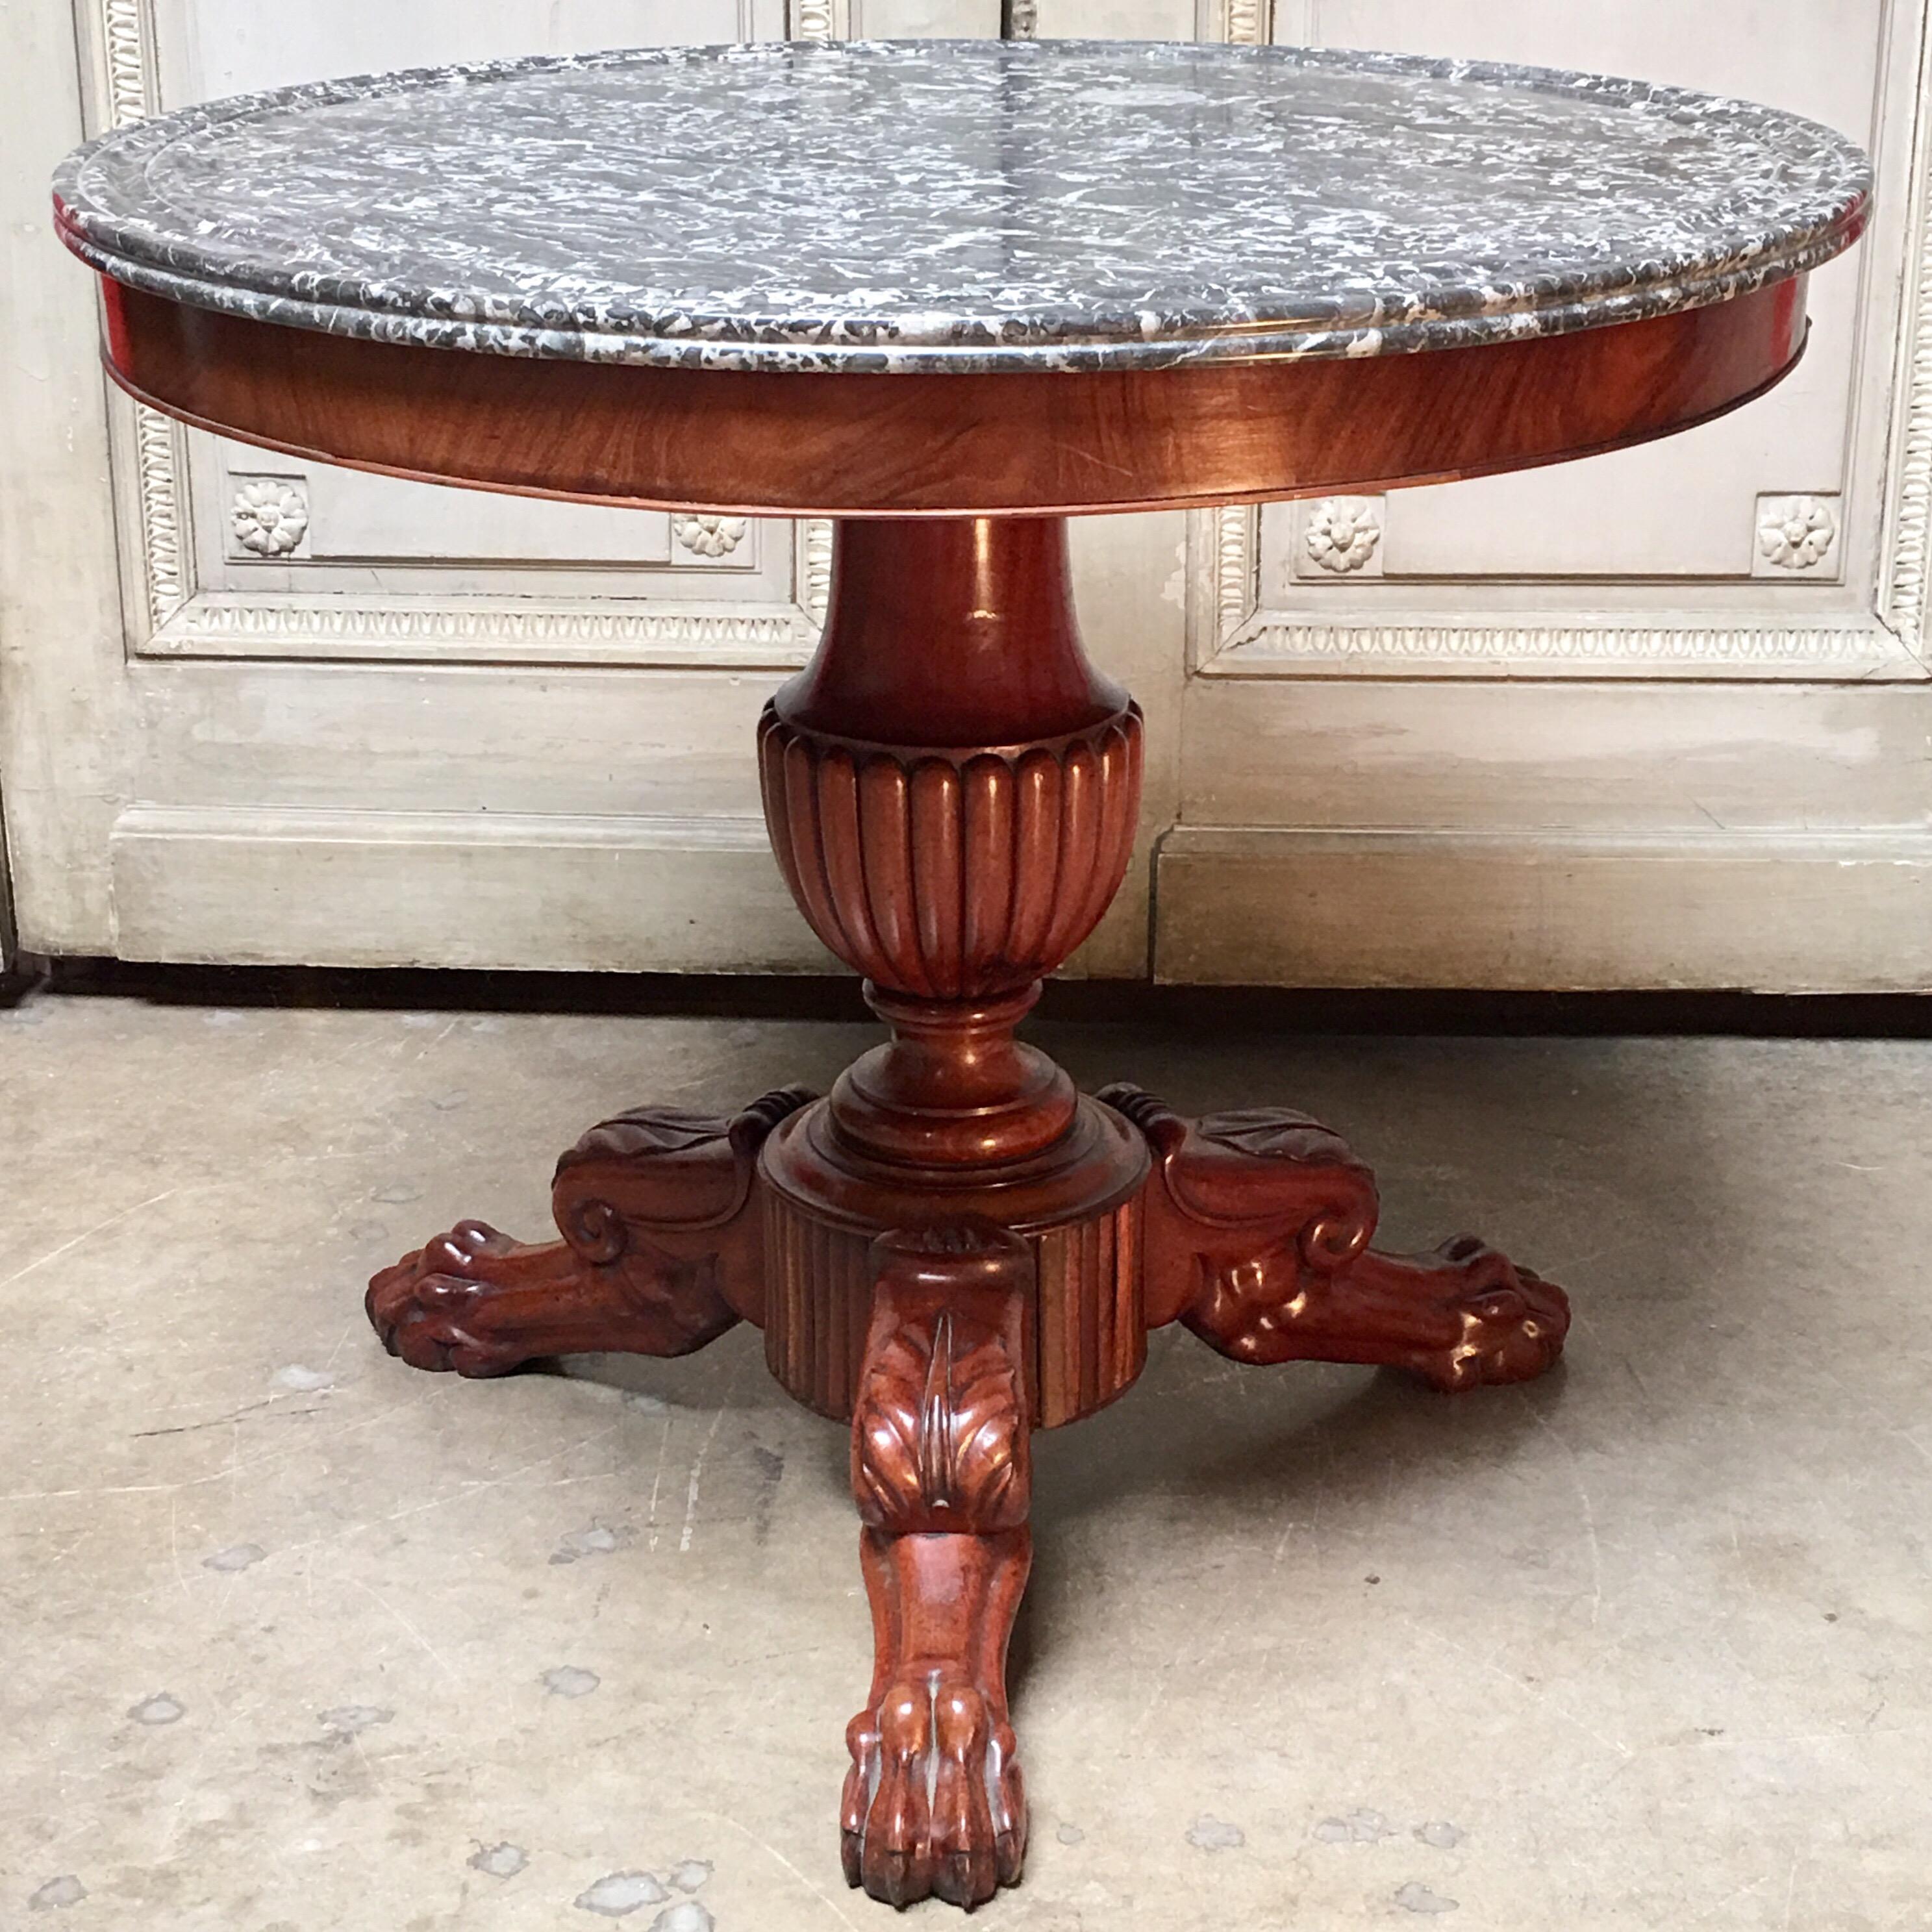 An early 19th century French Charles X mahogany table with a dark grey and white veined marble top. This handsome,  sculptural table has a carved urn shaped pedestal with acanthus leaf and claw foot feet. 